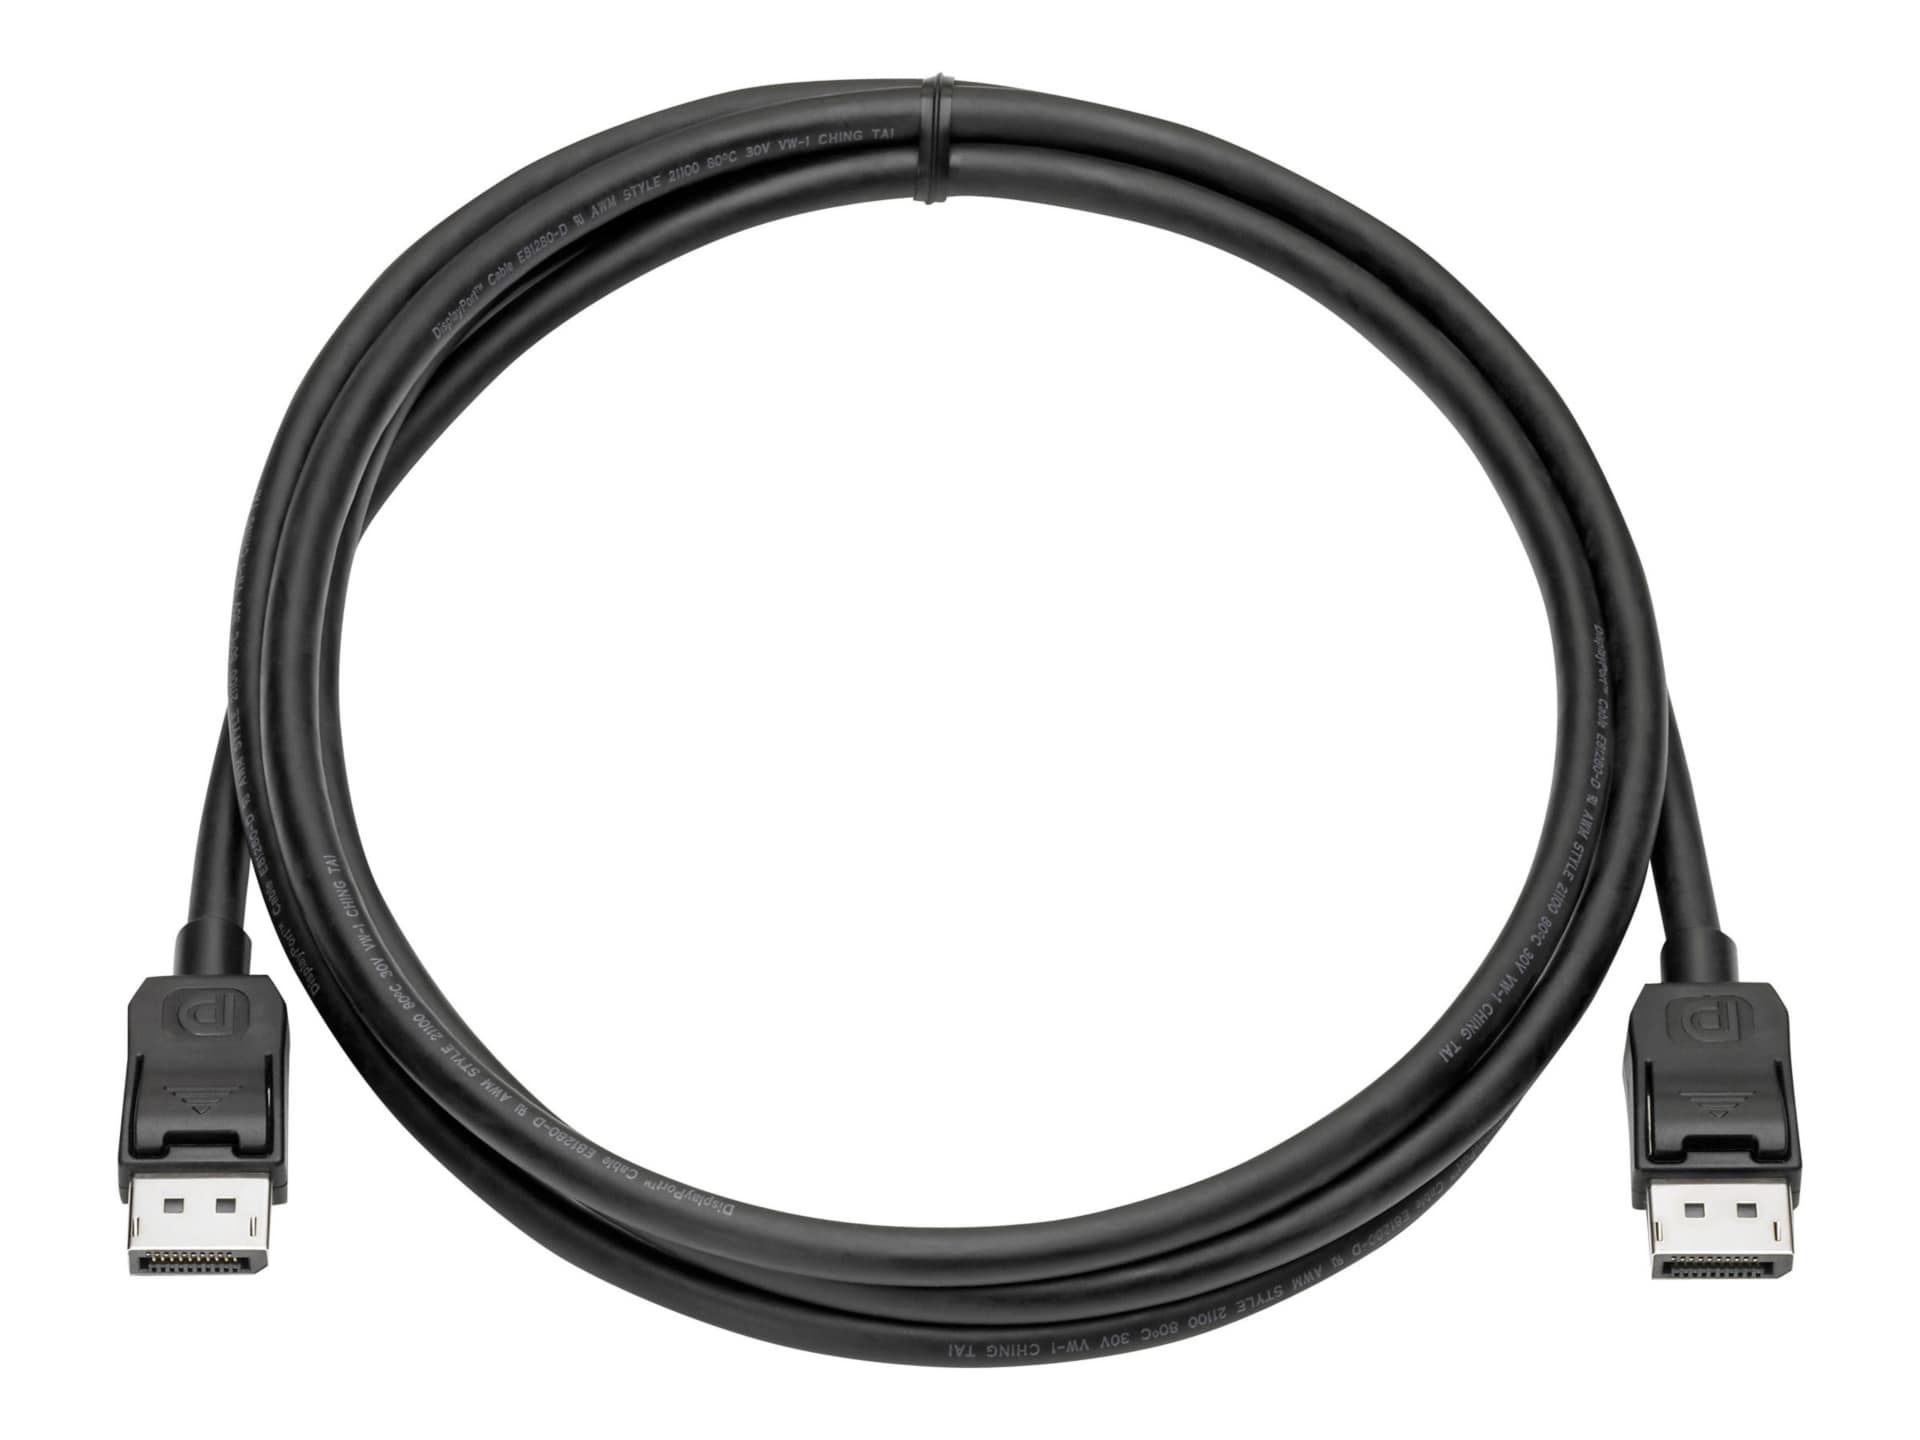 HP 6.6' Display Cable kit